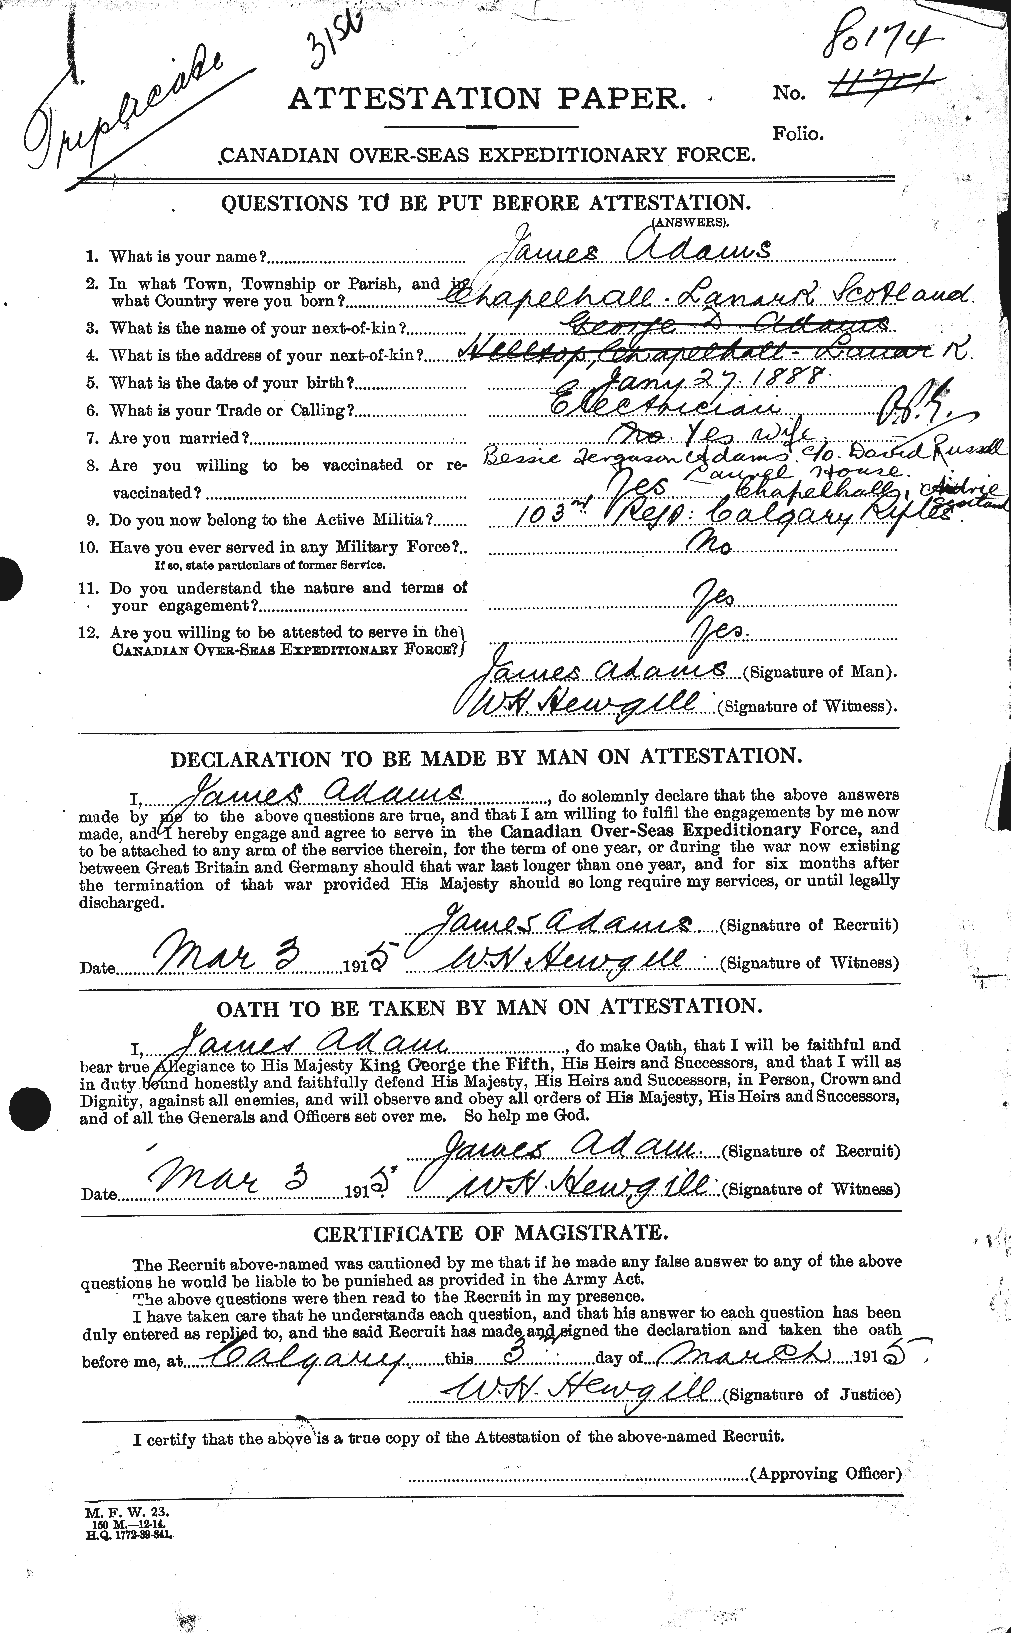 Personnel Records of the First World War - CEF 203236a